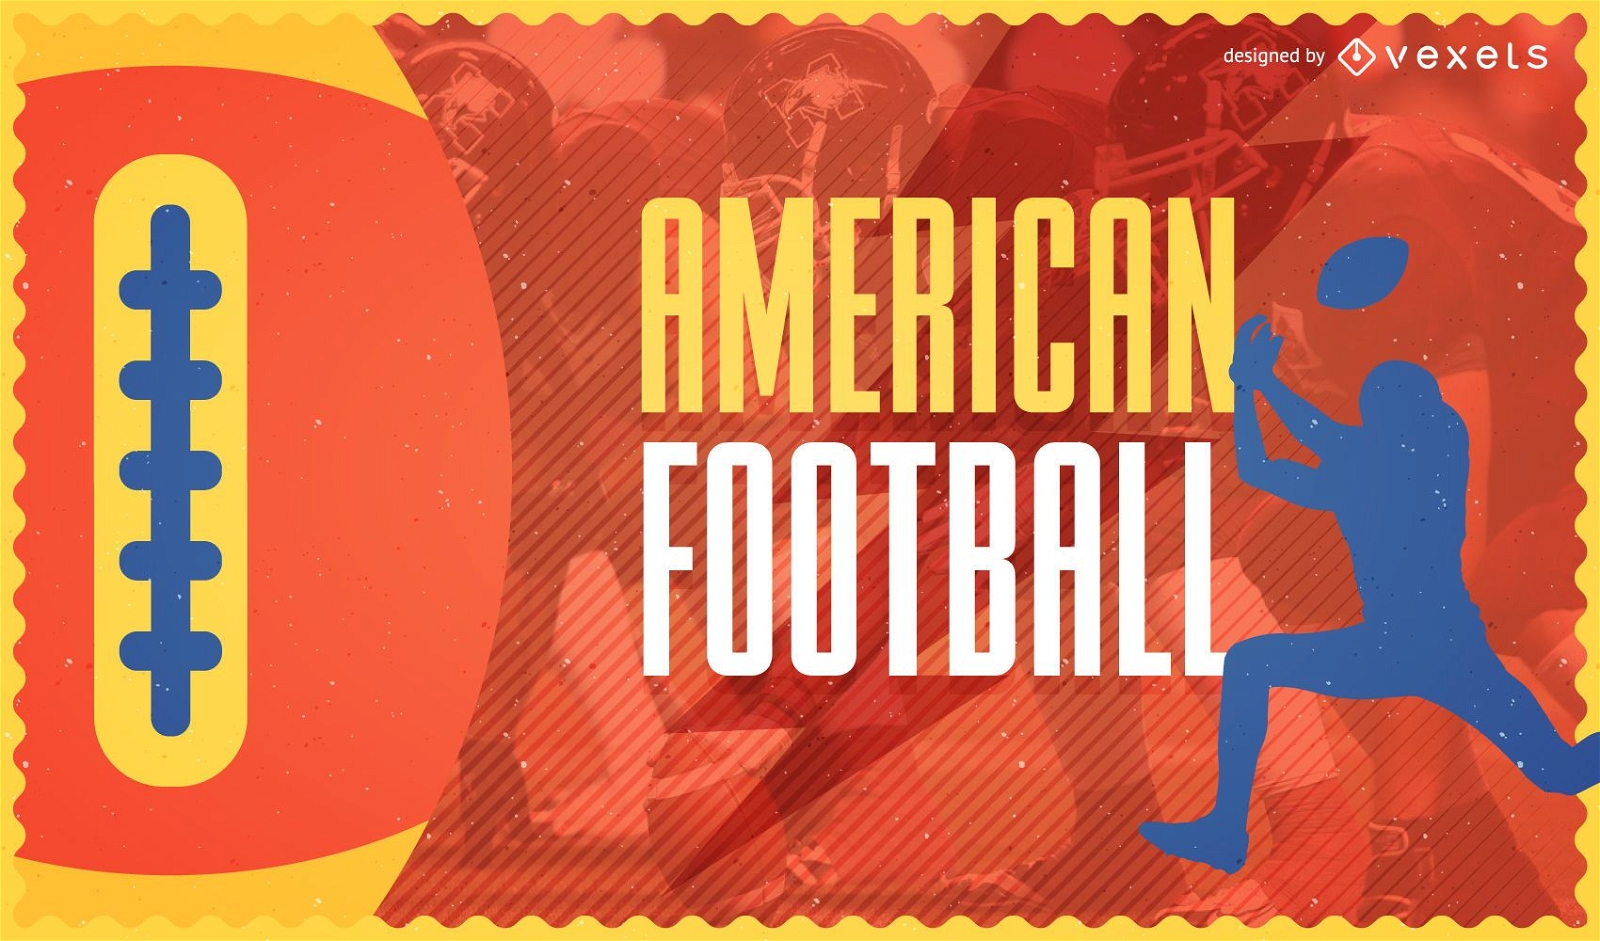 Colorful American Football poster